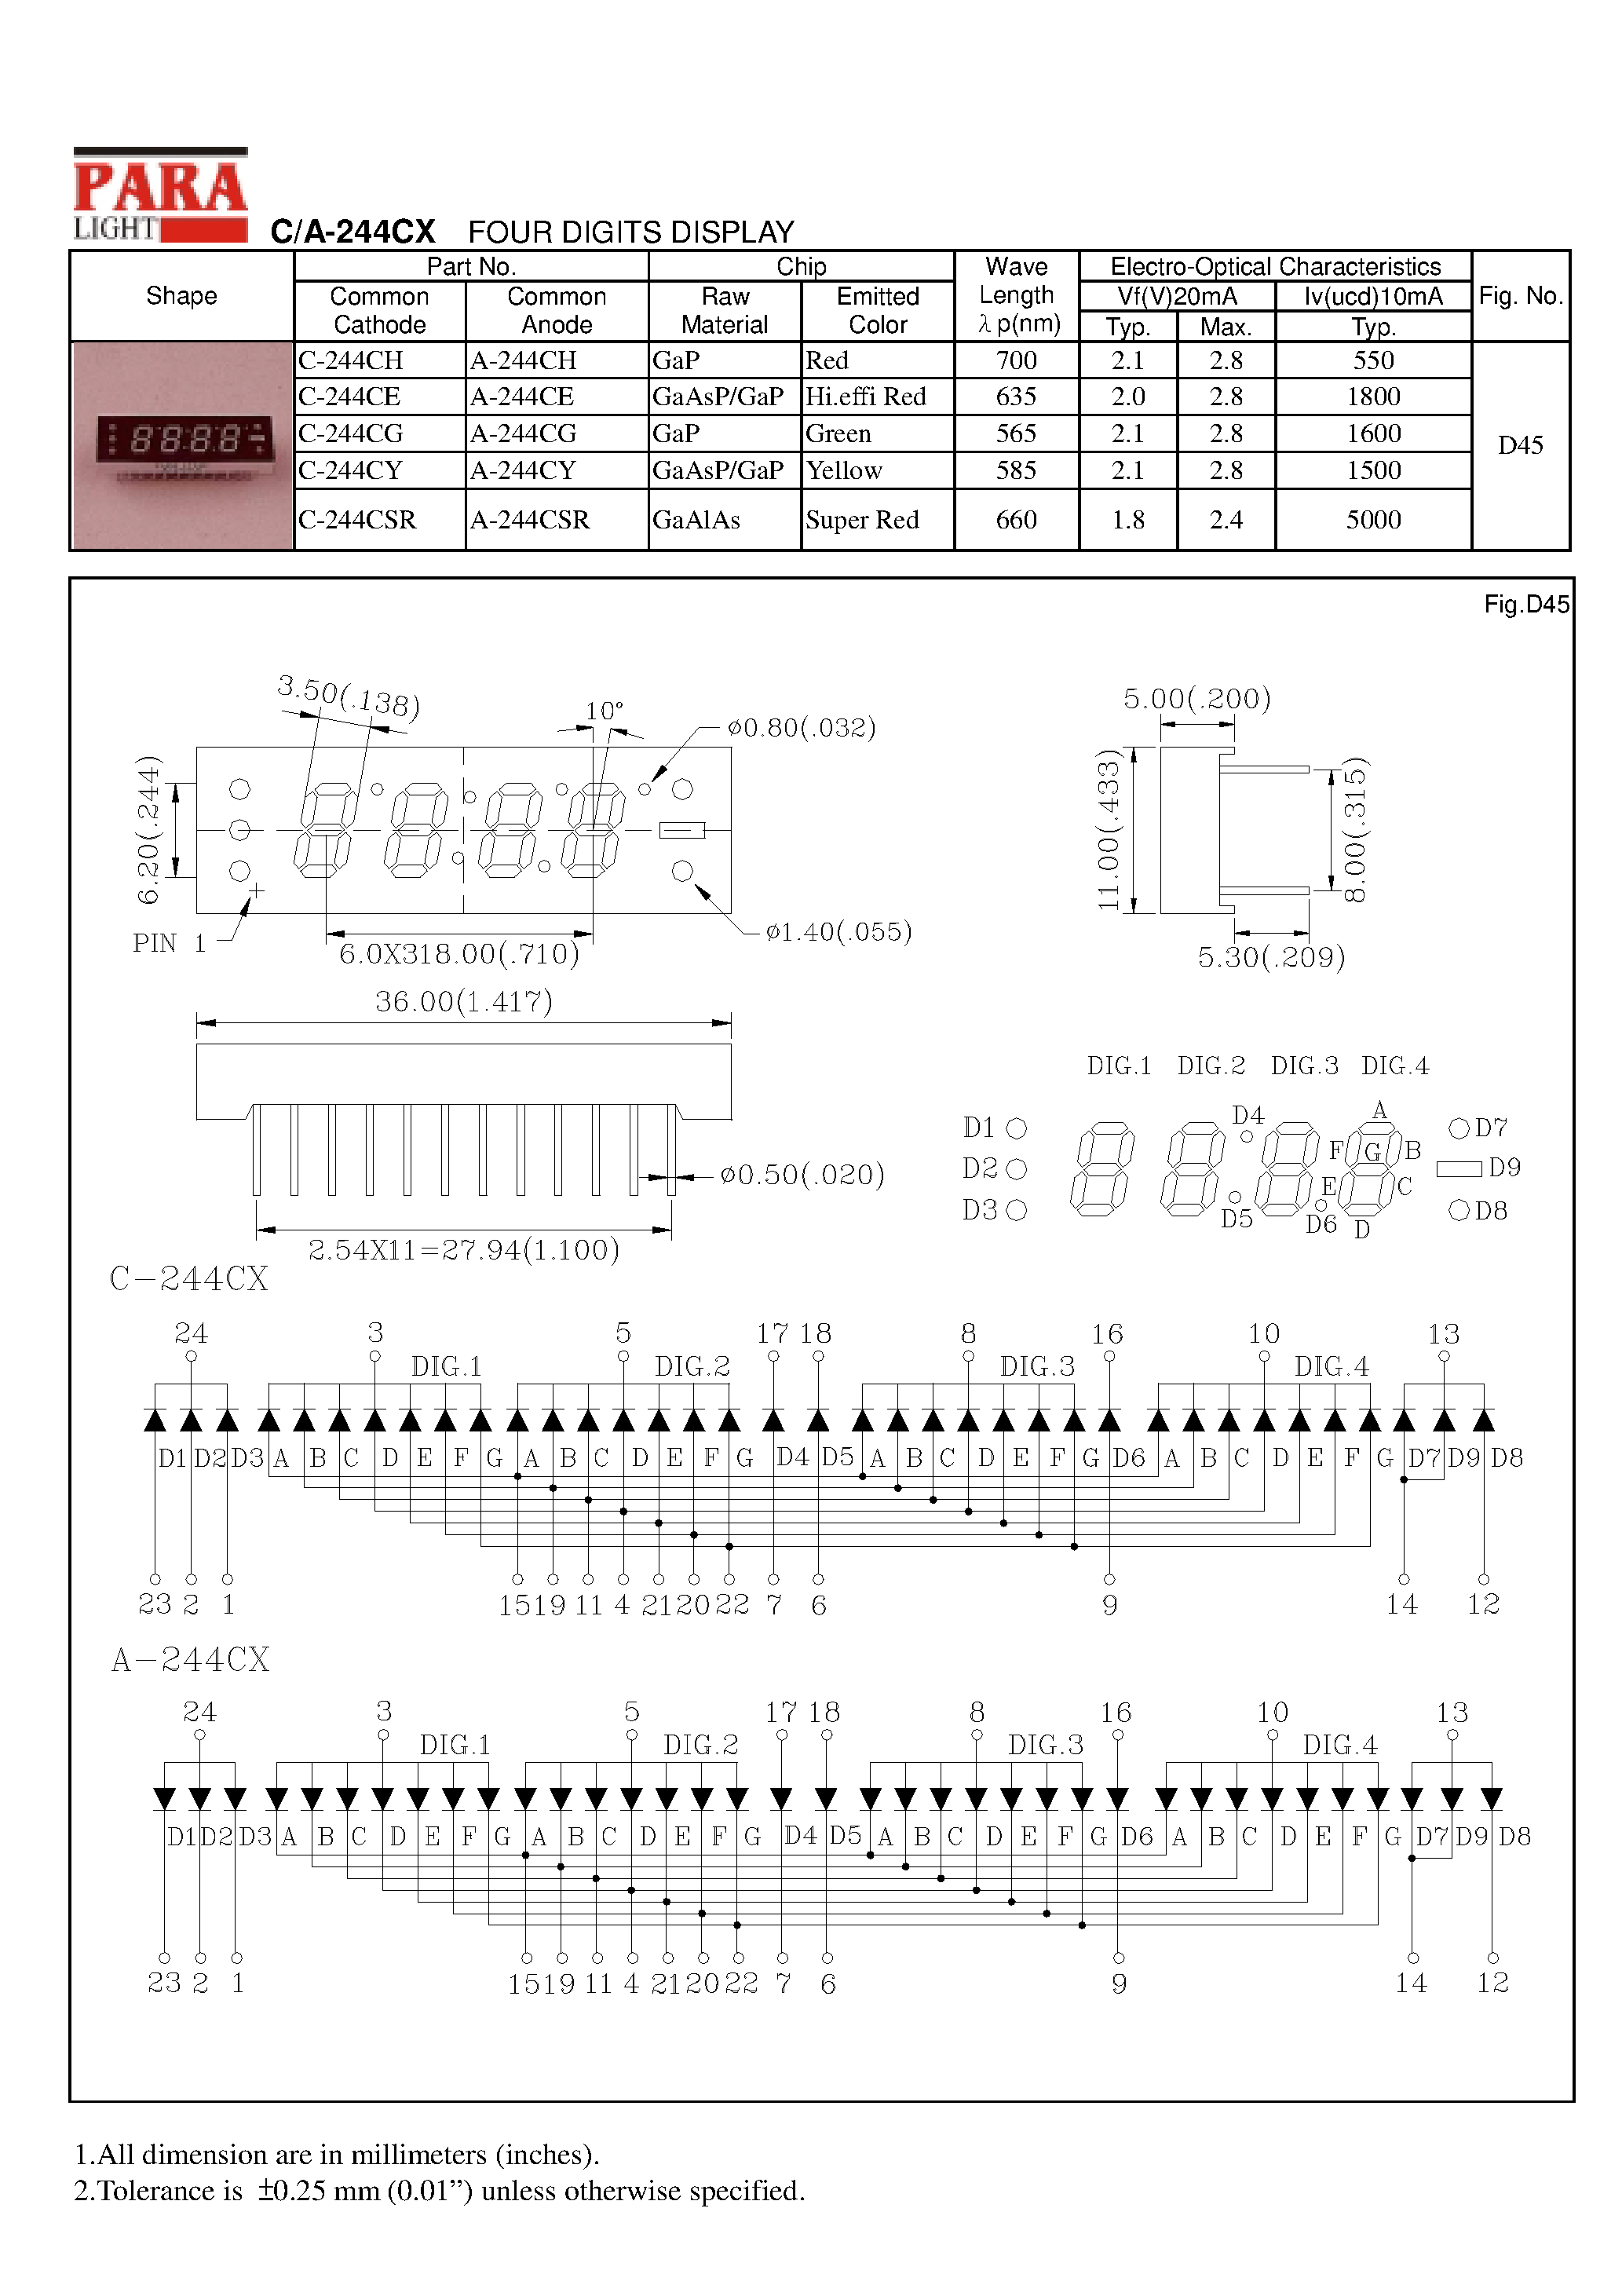 Datasheet A-244CG - FOUR DIGITS DISPLAY page 1